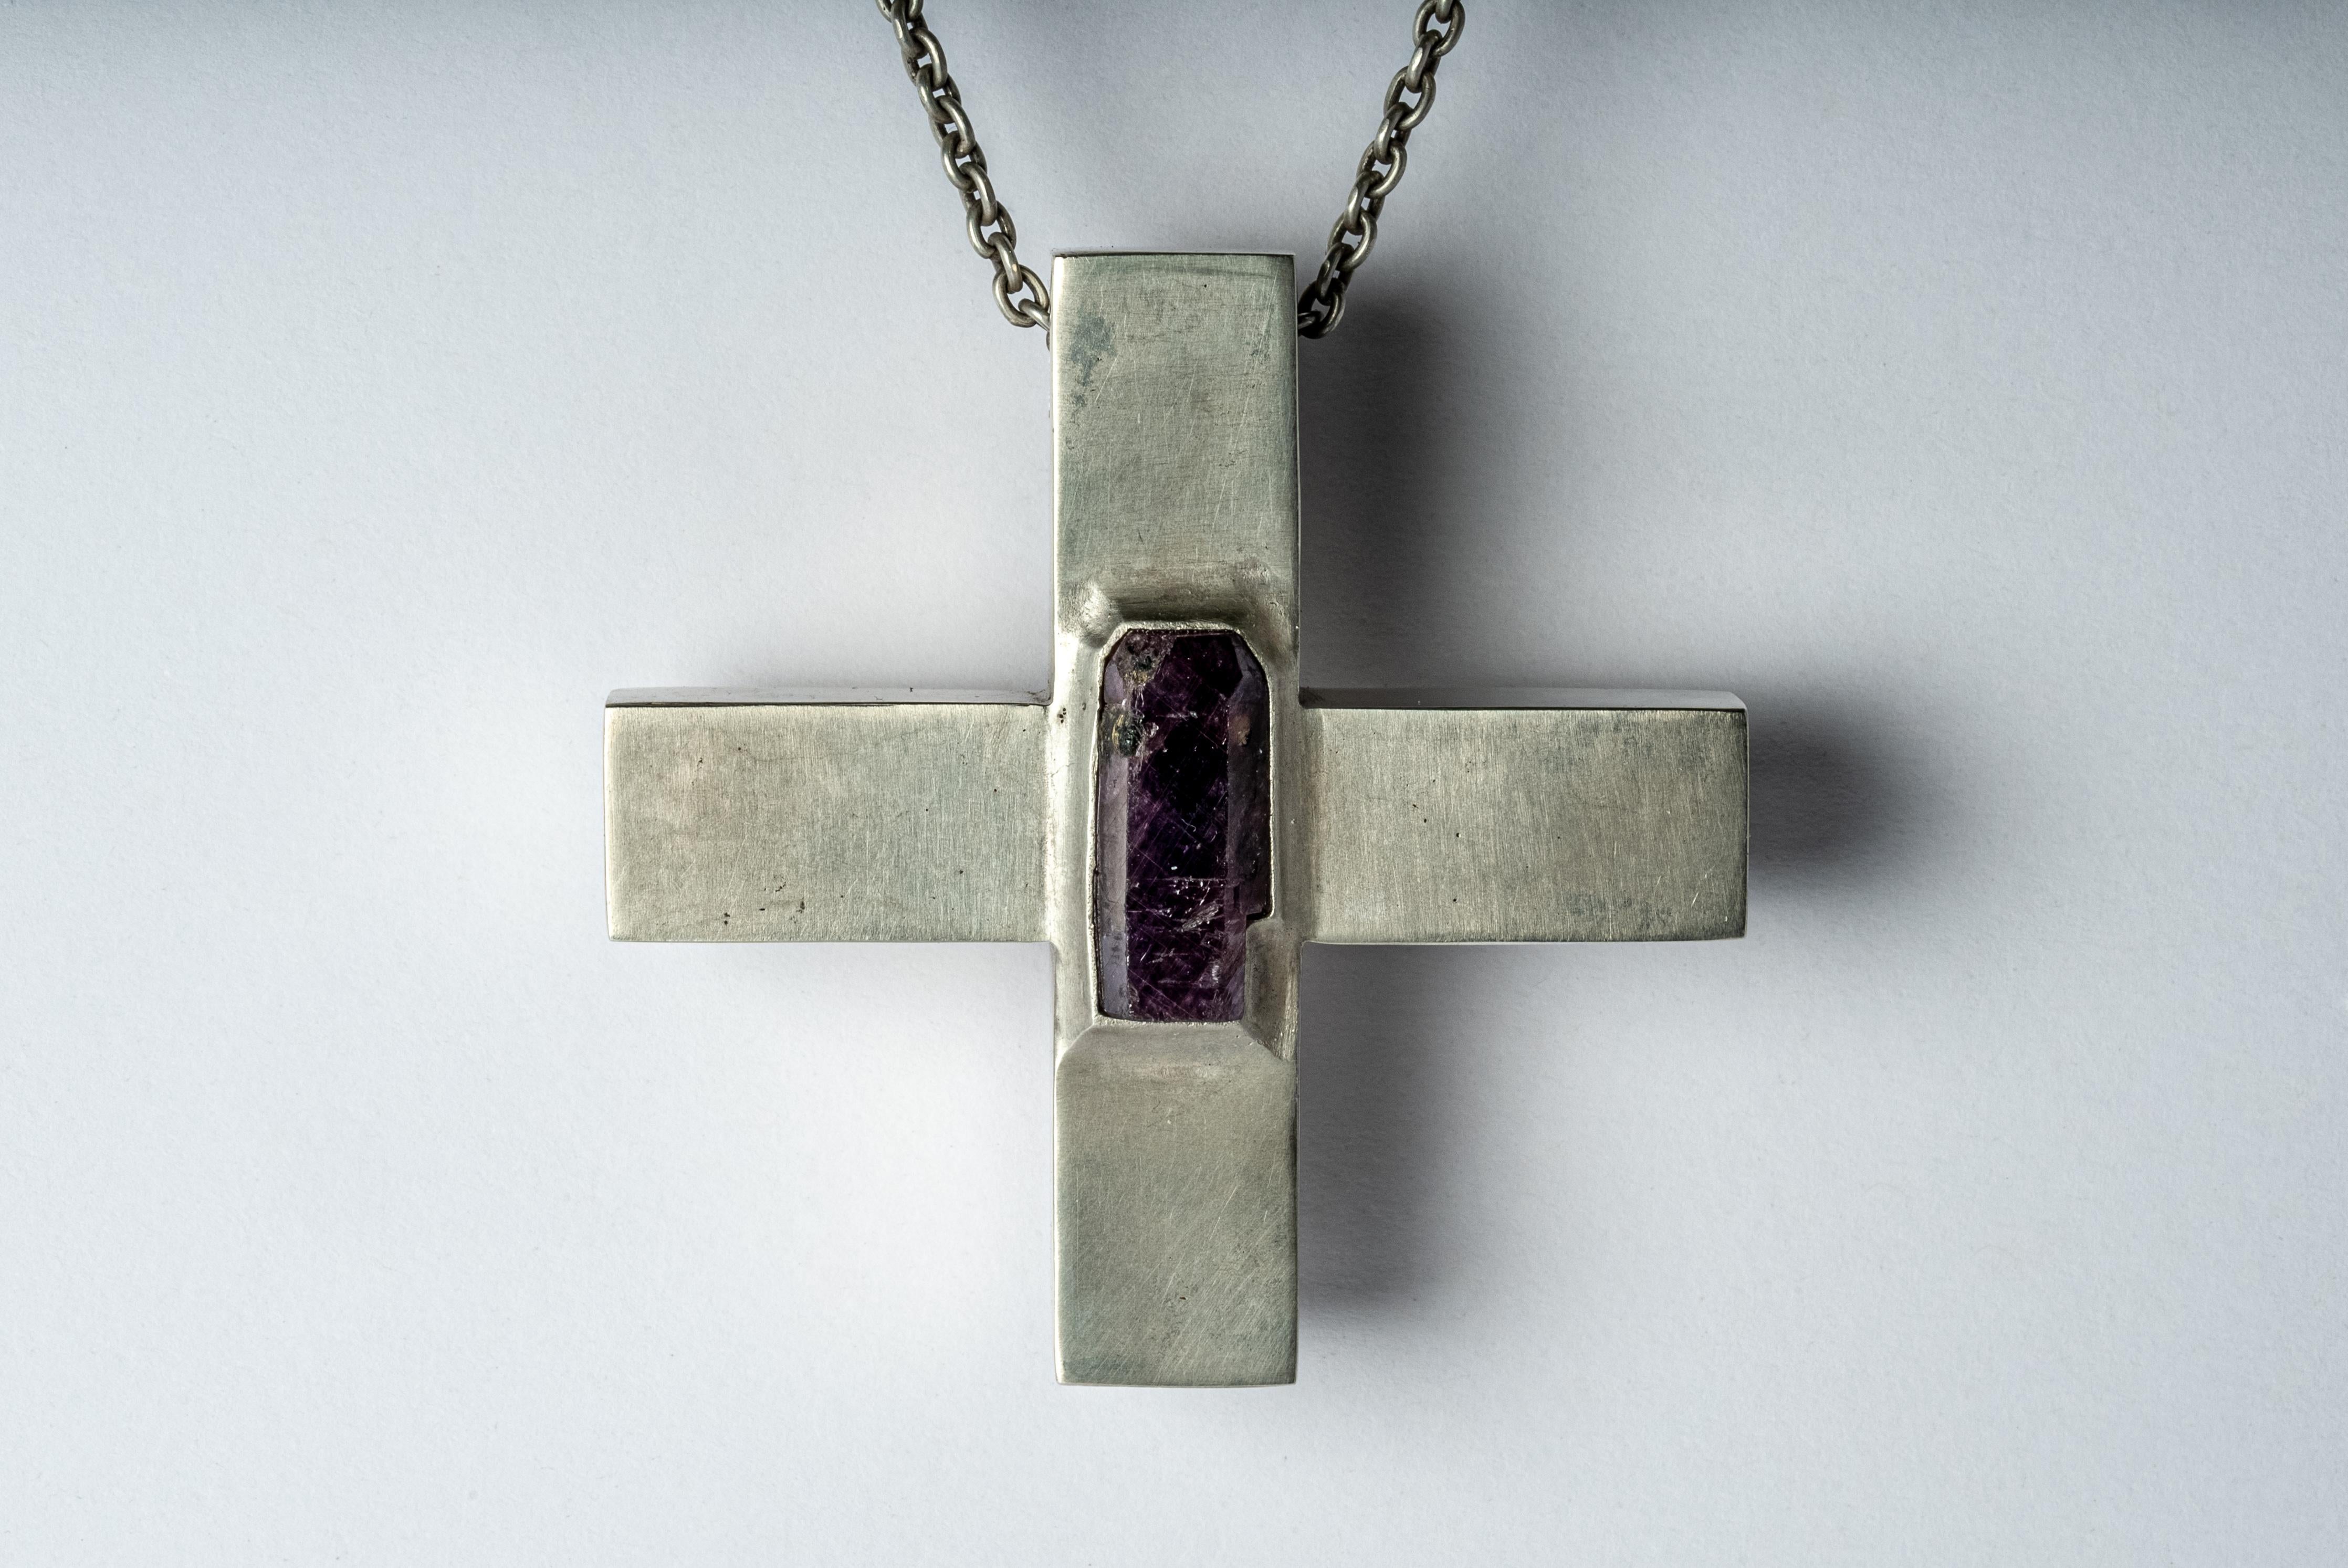 Plus necklace in sterling silver and a slab of rough winza ruby. It comes with 74 cm sterling silver chain. 